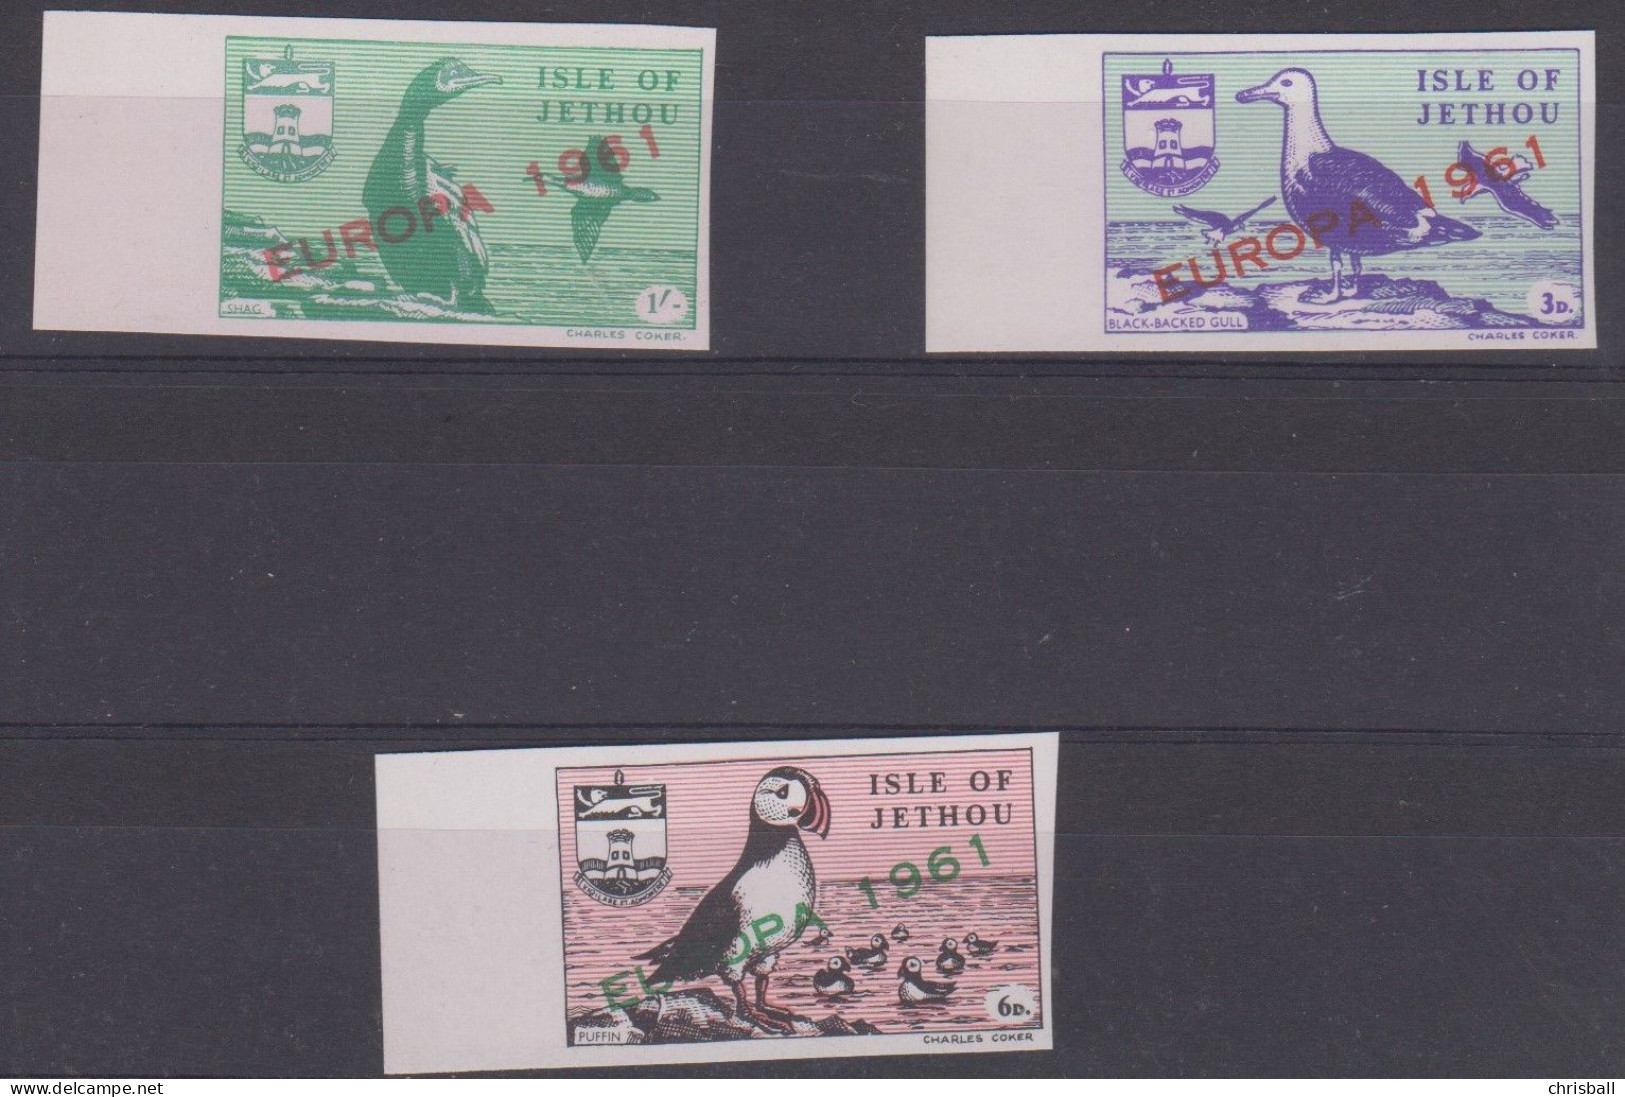 Guernsey Jethou Europa 1961 Set Of 3, IMPERF Unmounted Mint - Guernesey